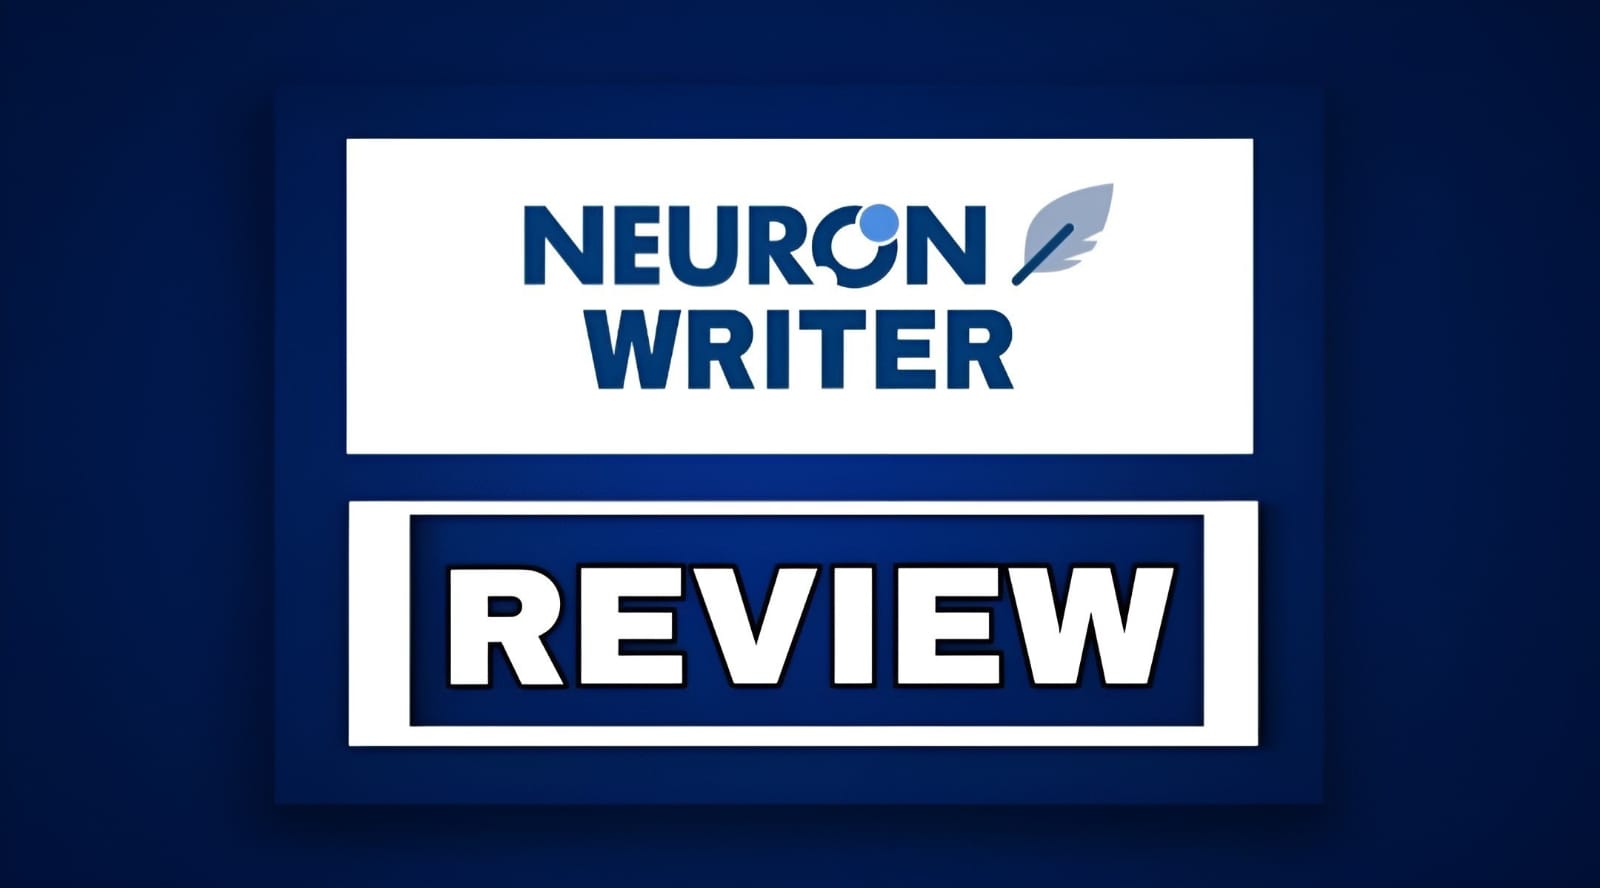 NeuronWriter Review - Is It One of the Best Content Writing AI Tools?